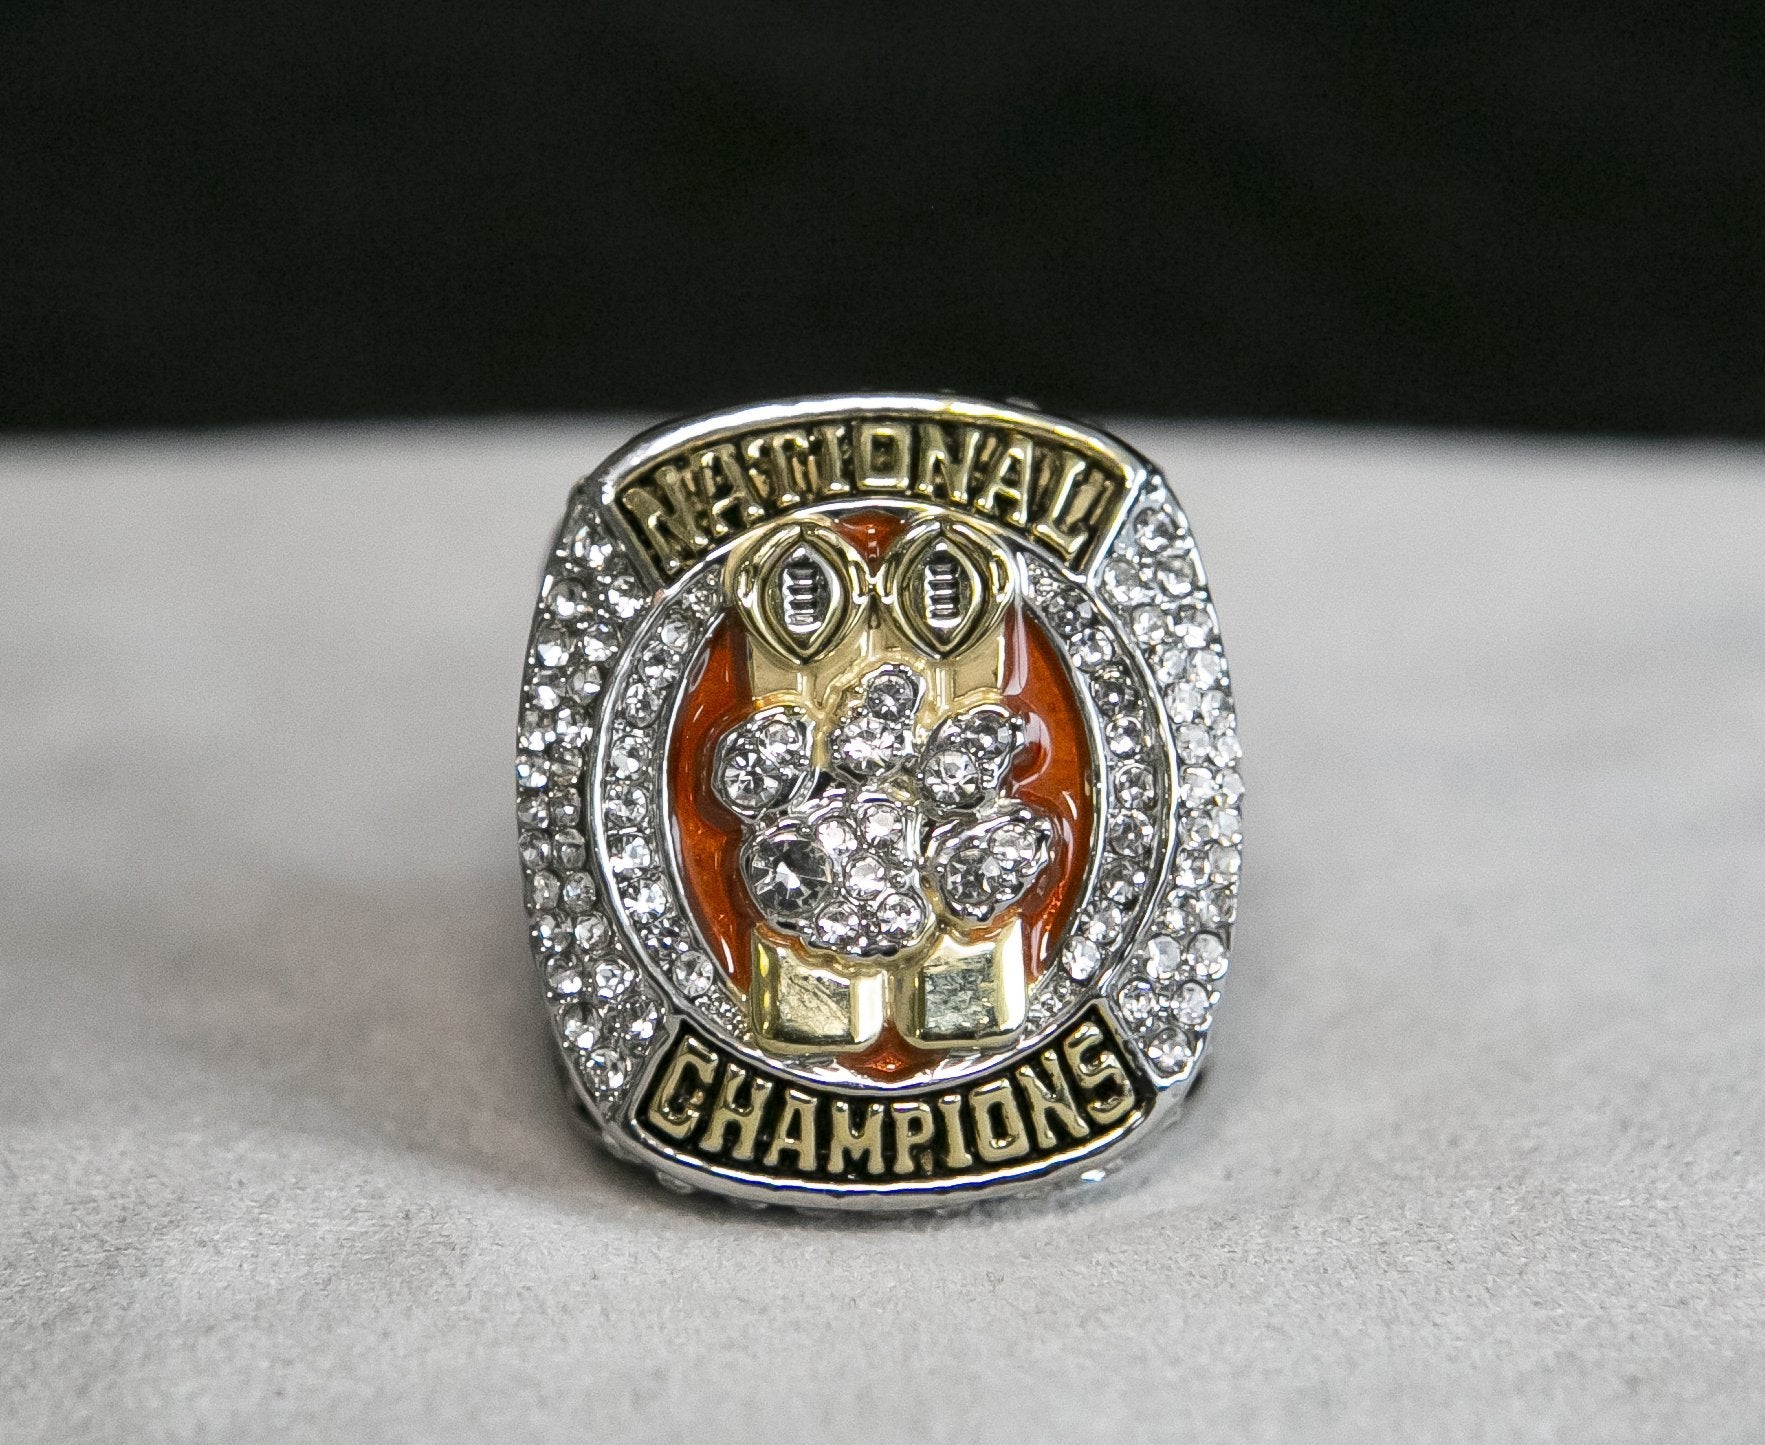 Clemson Tigers College National Championship Ring (2018) - Rings For Champs, NFL rings, MLB rings, NBA rings, NHL rings, NCAA rings, Super bowl ring, Superbowl ring, Super bowl rings, Superbowl rings, Dallas Cowboys